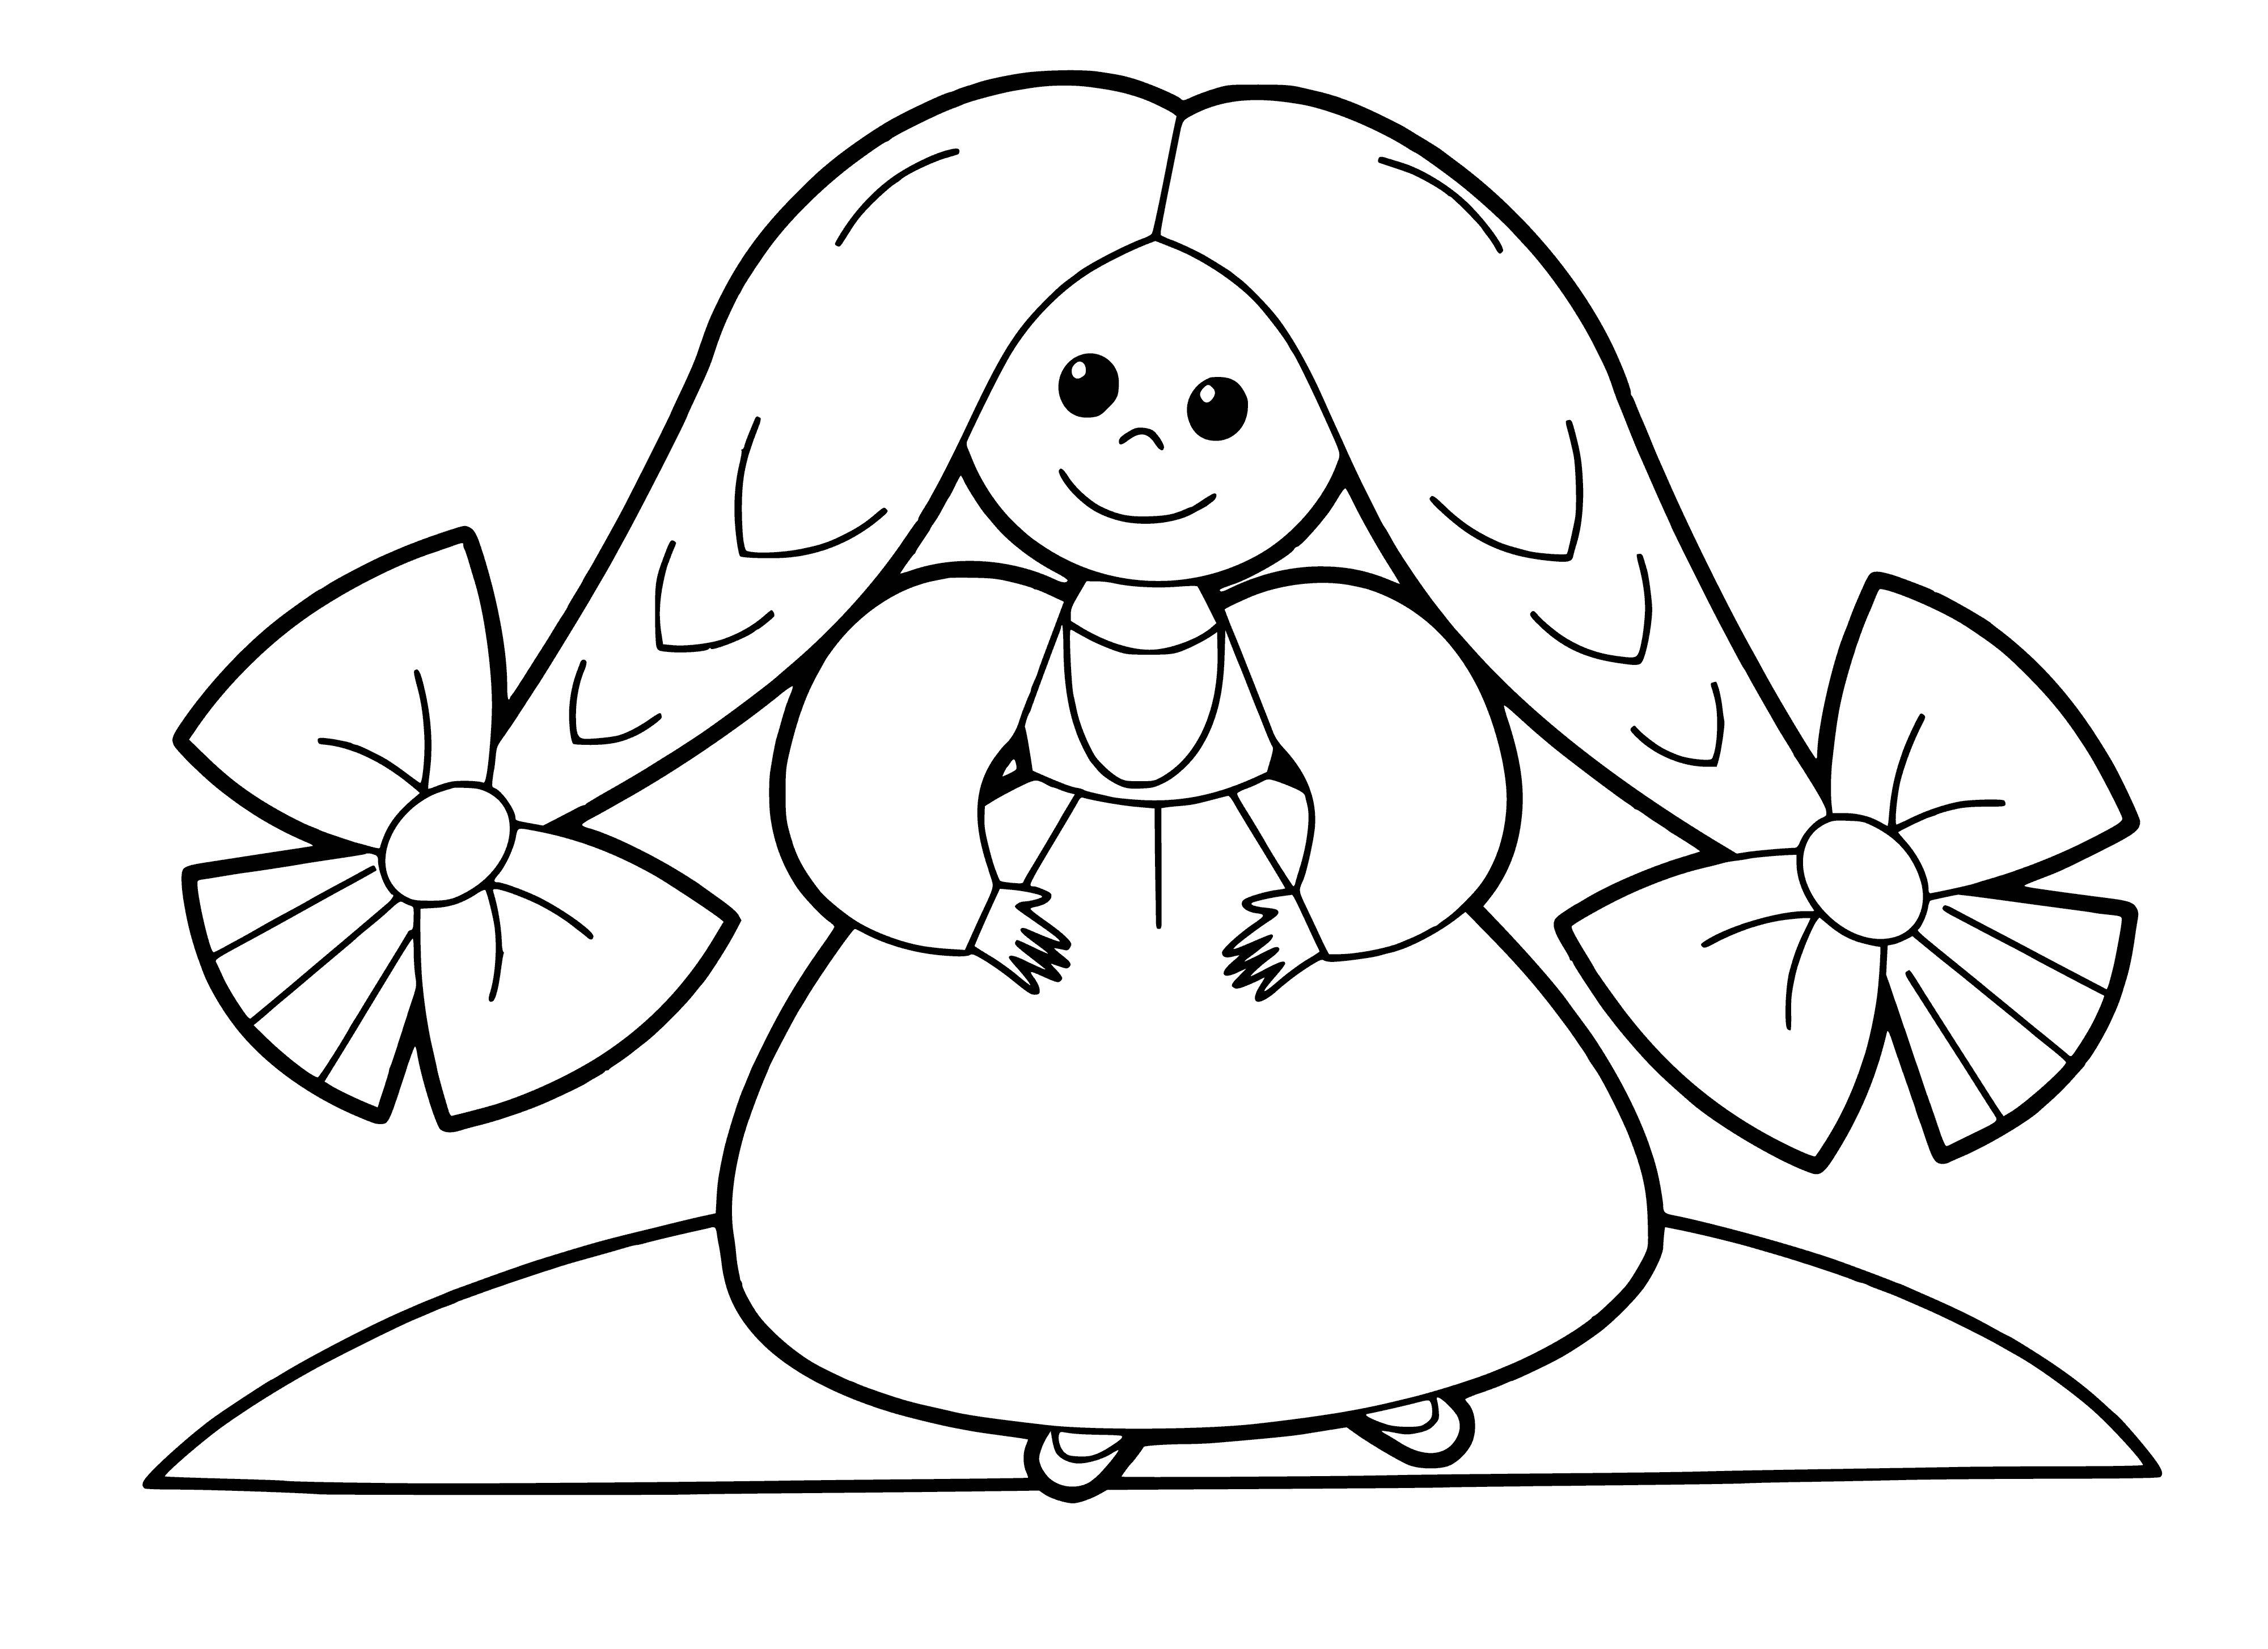 Girl with braids coloring page